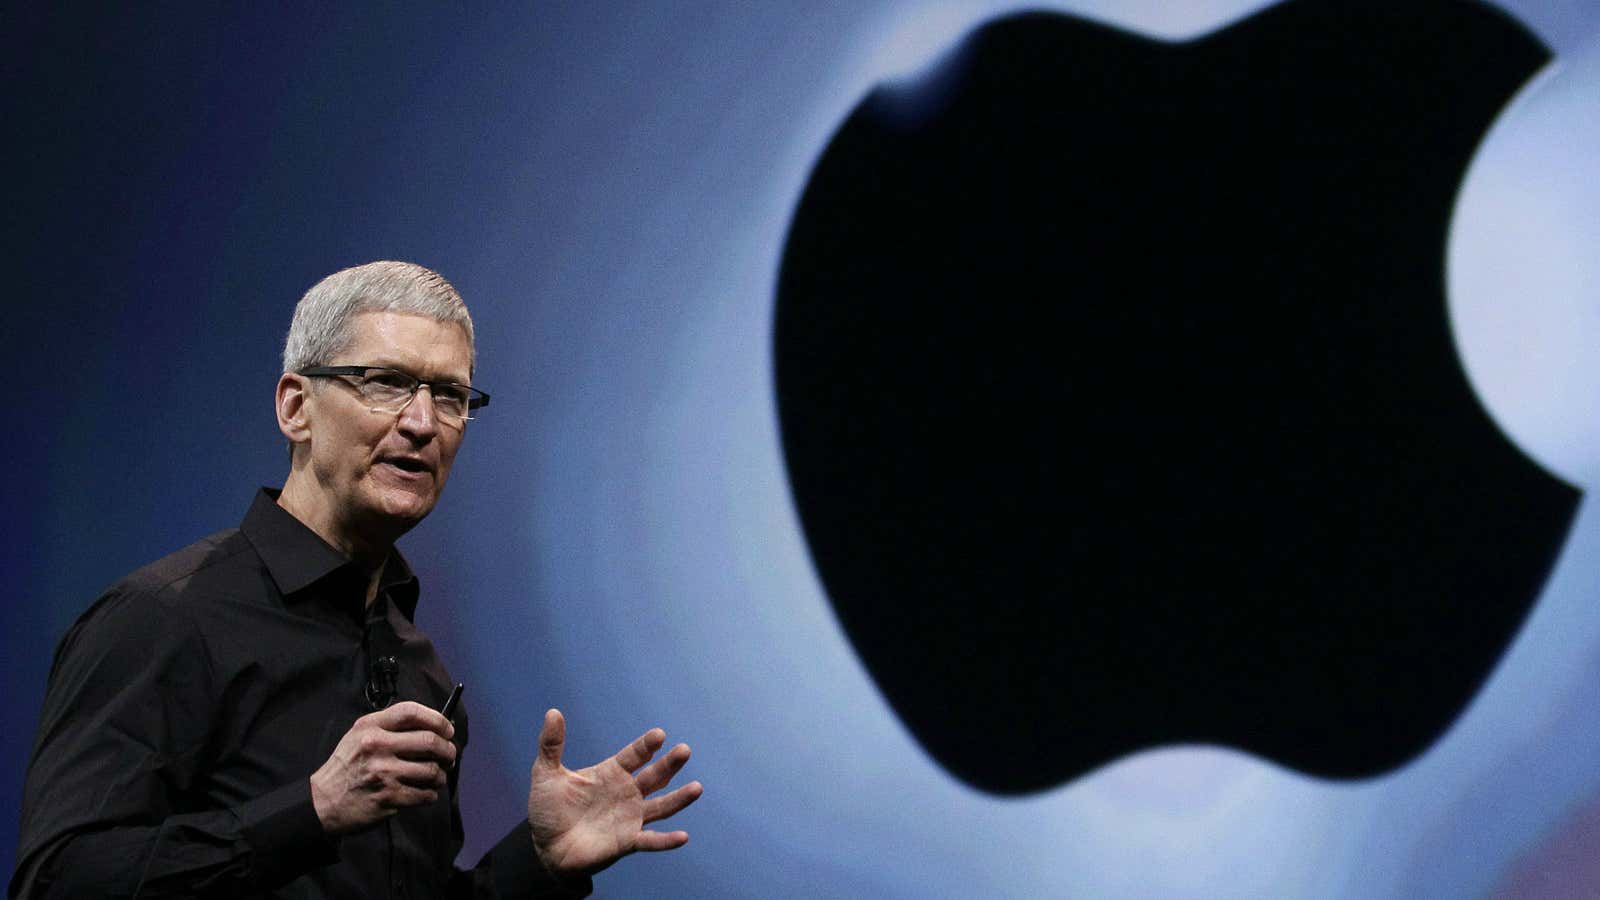 Apple has continued to increase revenue under CEO Tim Cook, especially with the release of the iPhone5.